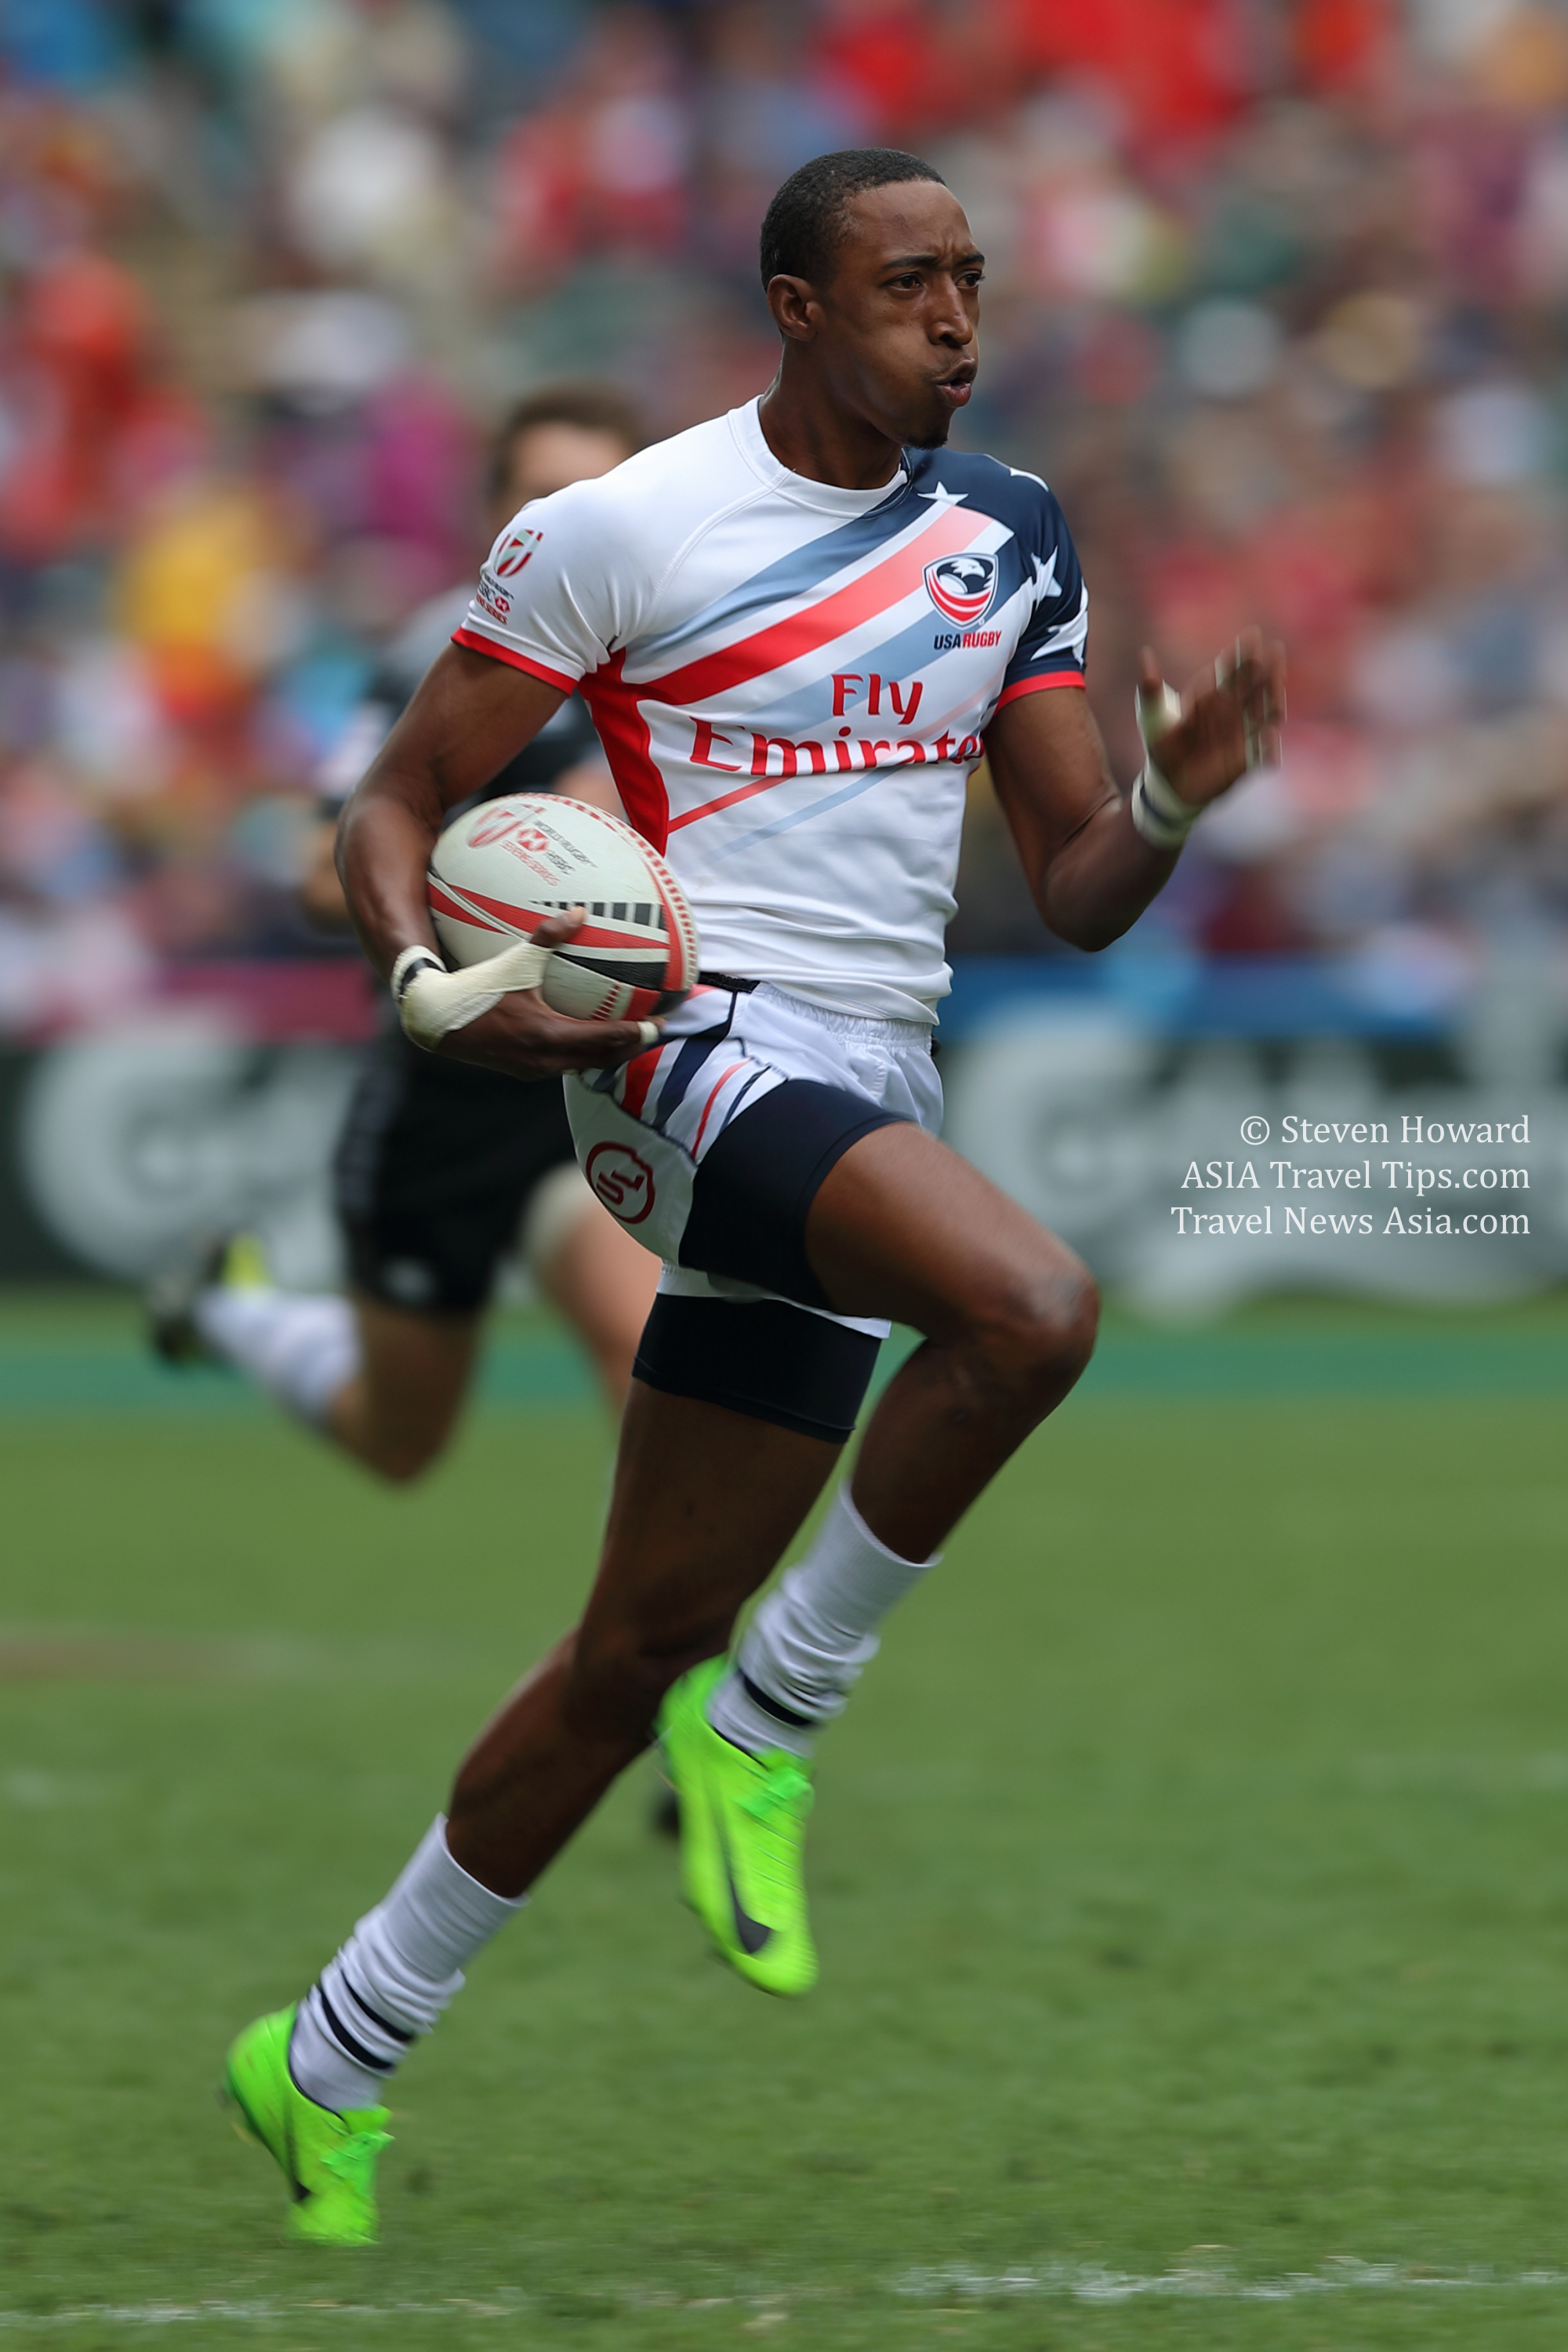 Perry Baker in action at the 2018 Cathay Pacific / HSBC Hong Kong Sevens. Pictures taken by Steven Howard of TravelNewsAsia.com Click to enlarge.